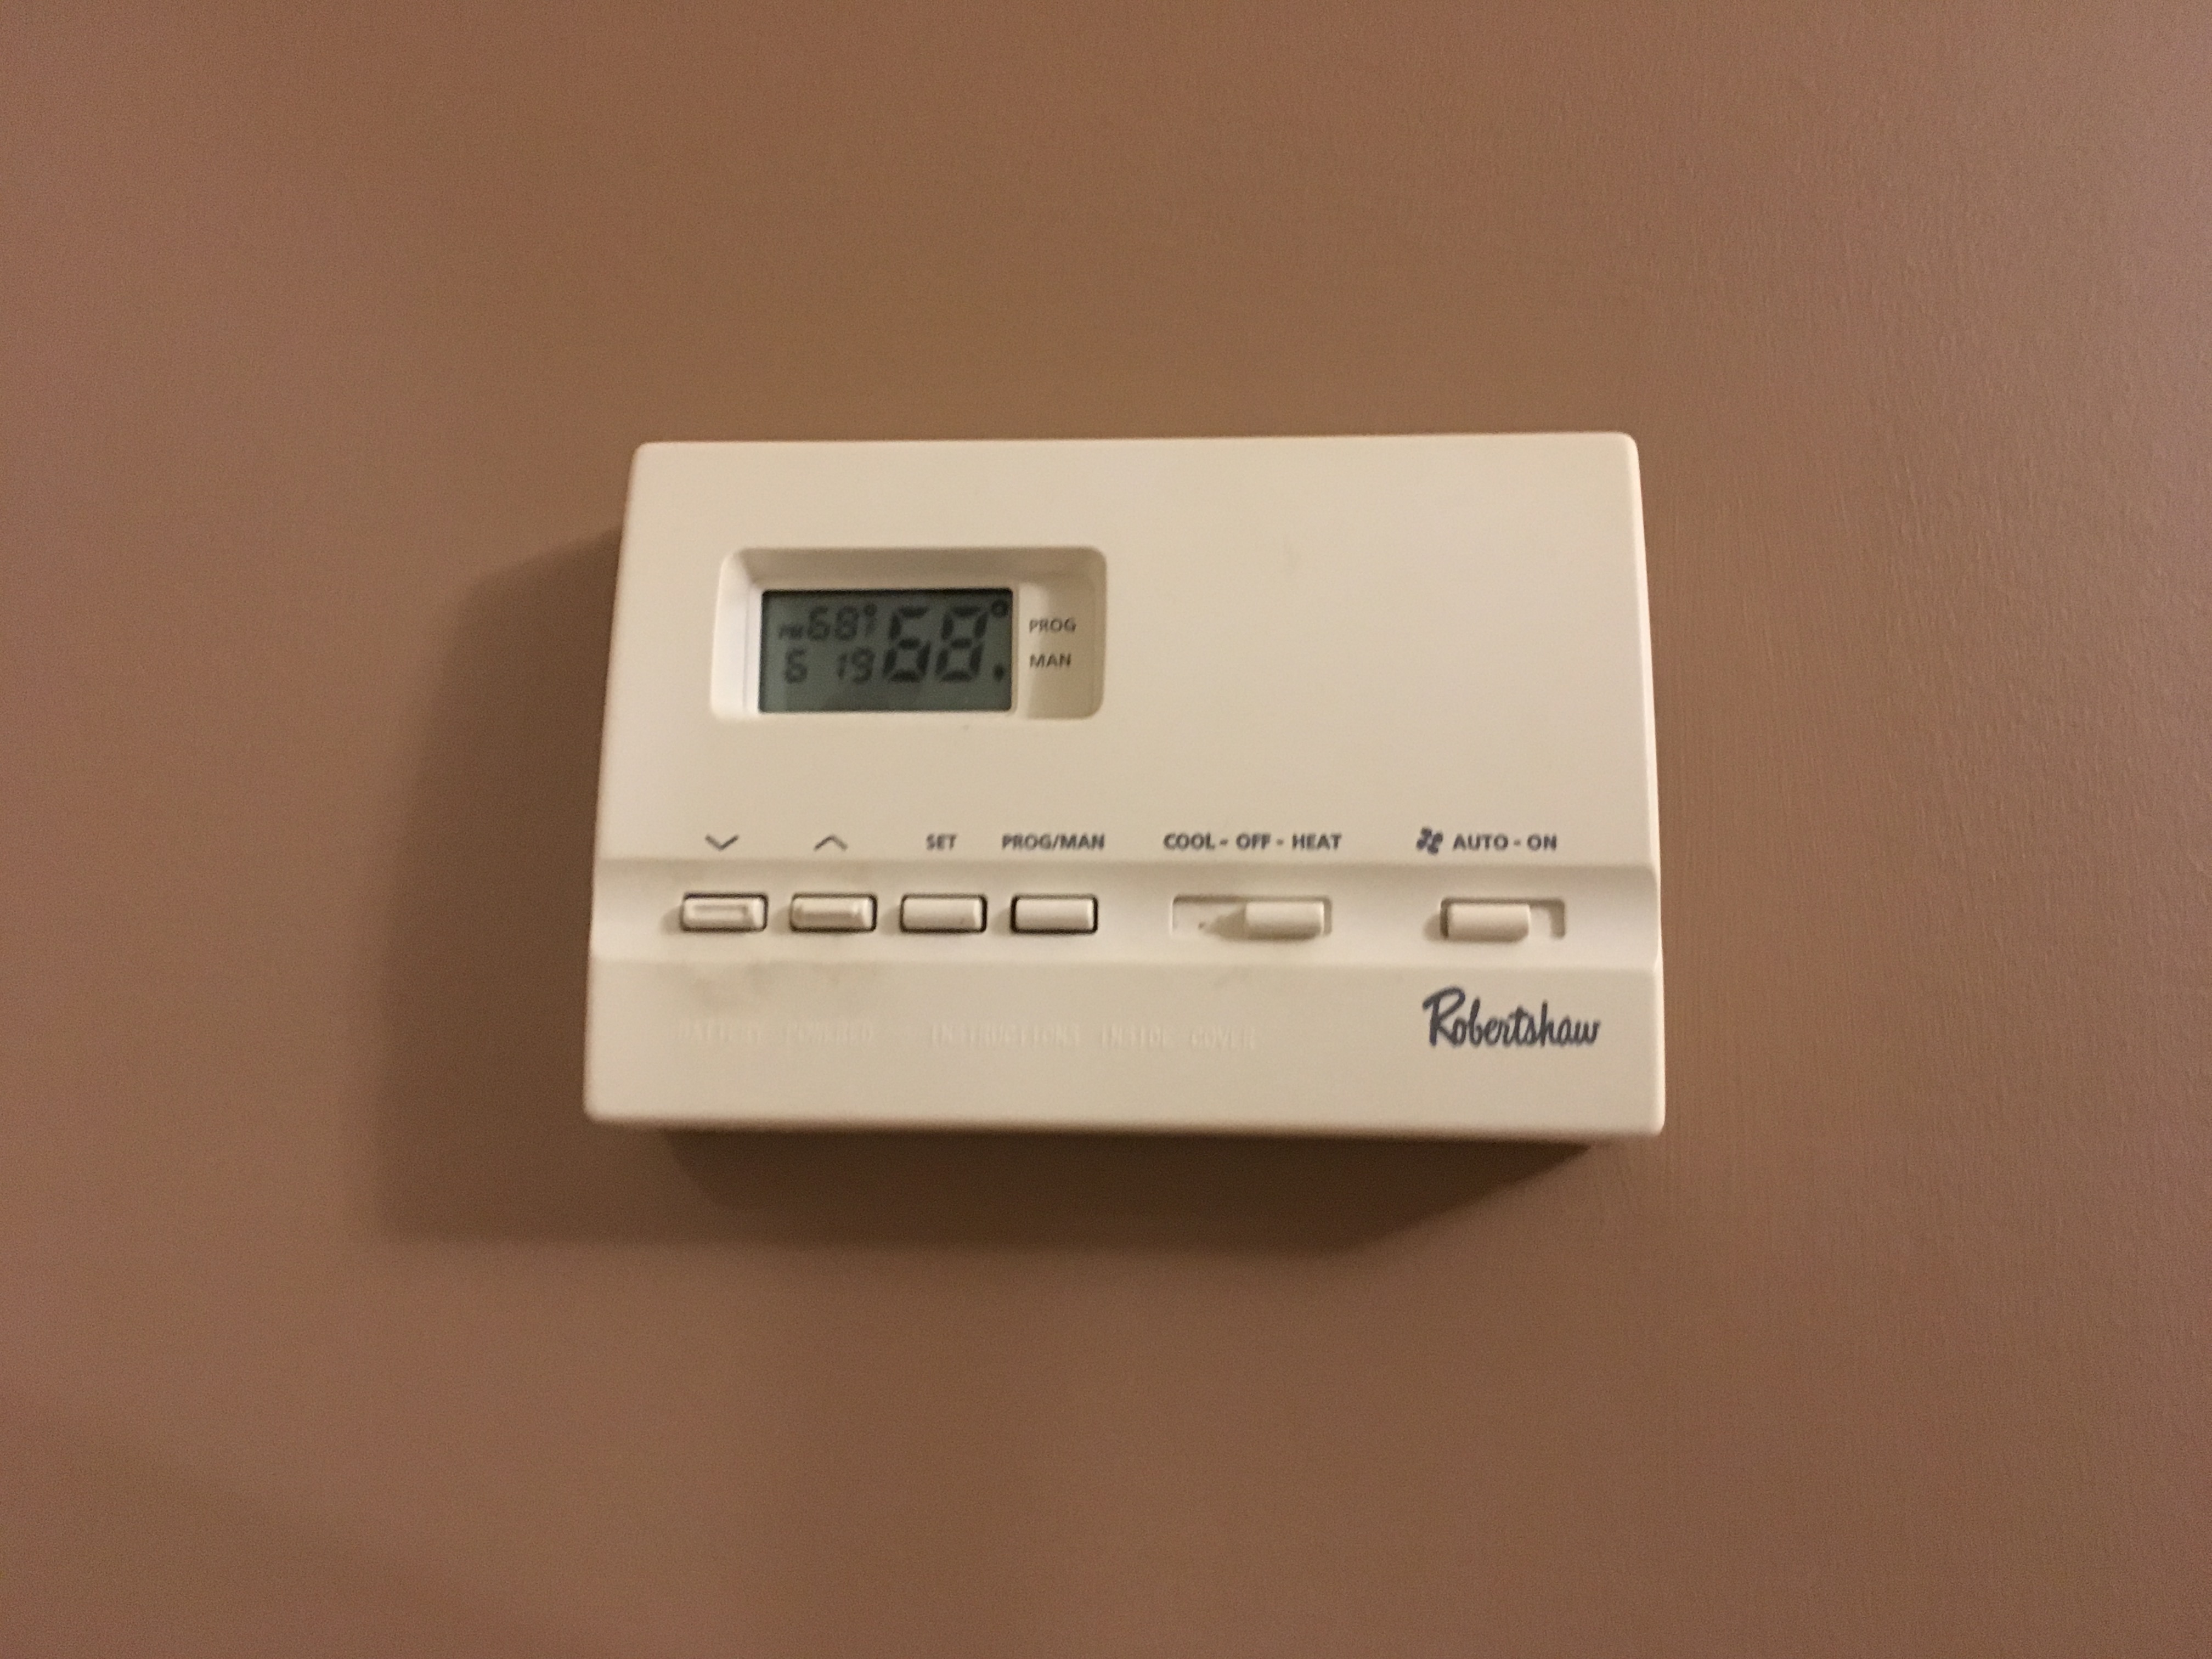 File:Thermostat science photo.jpg - Wikimedia Commons